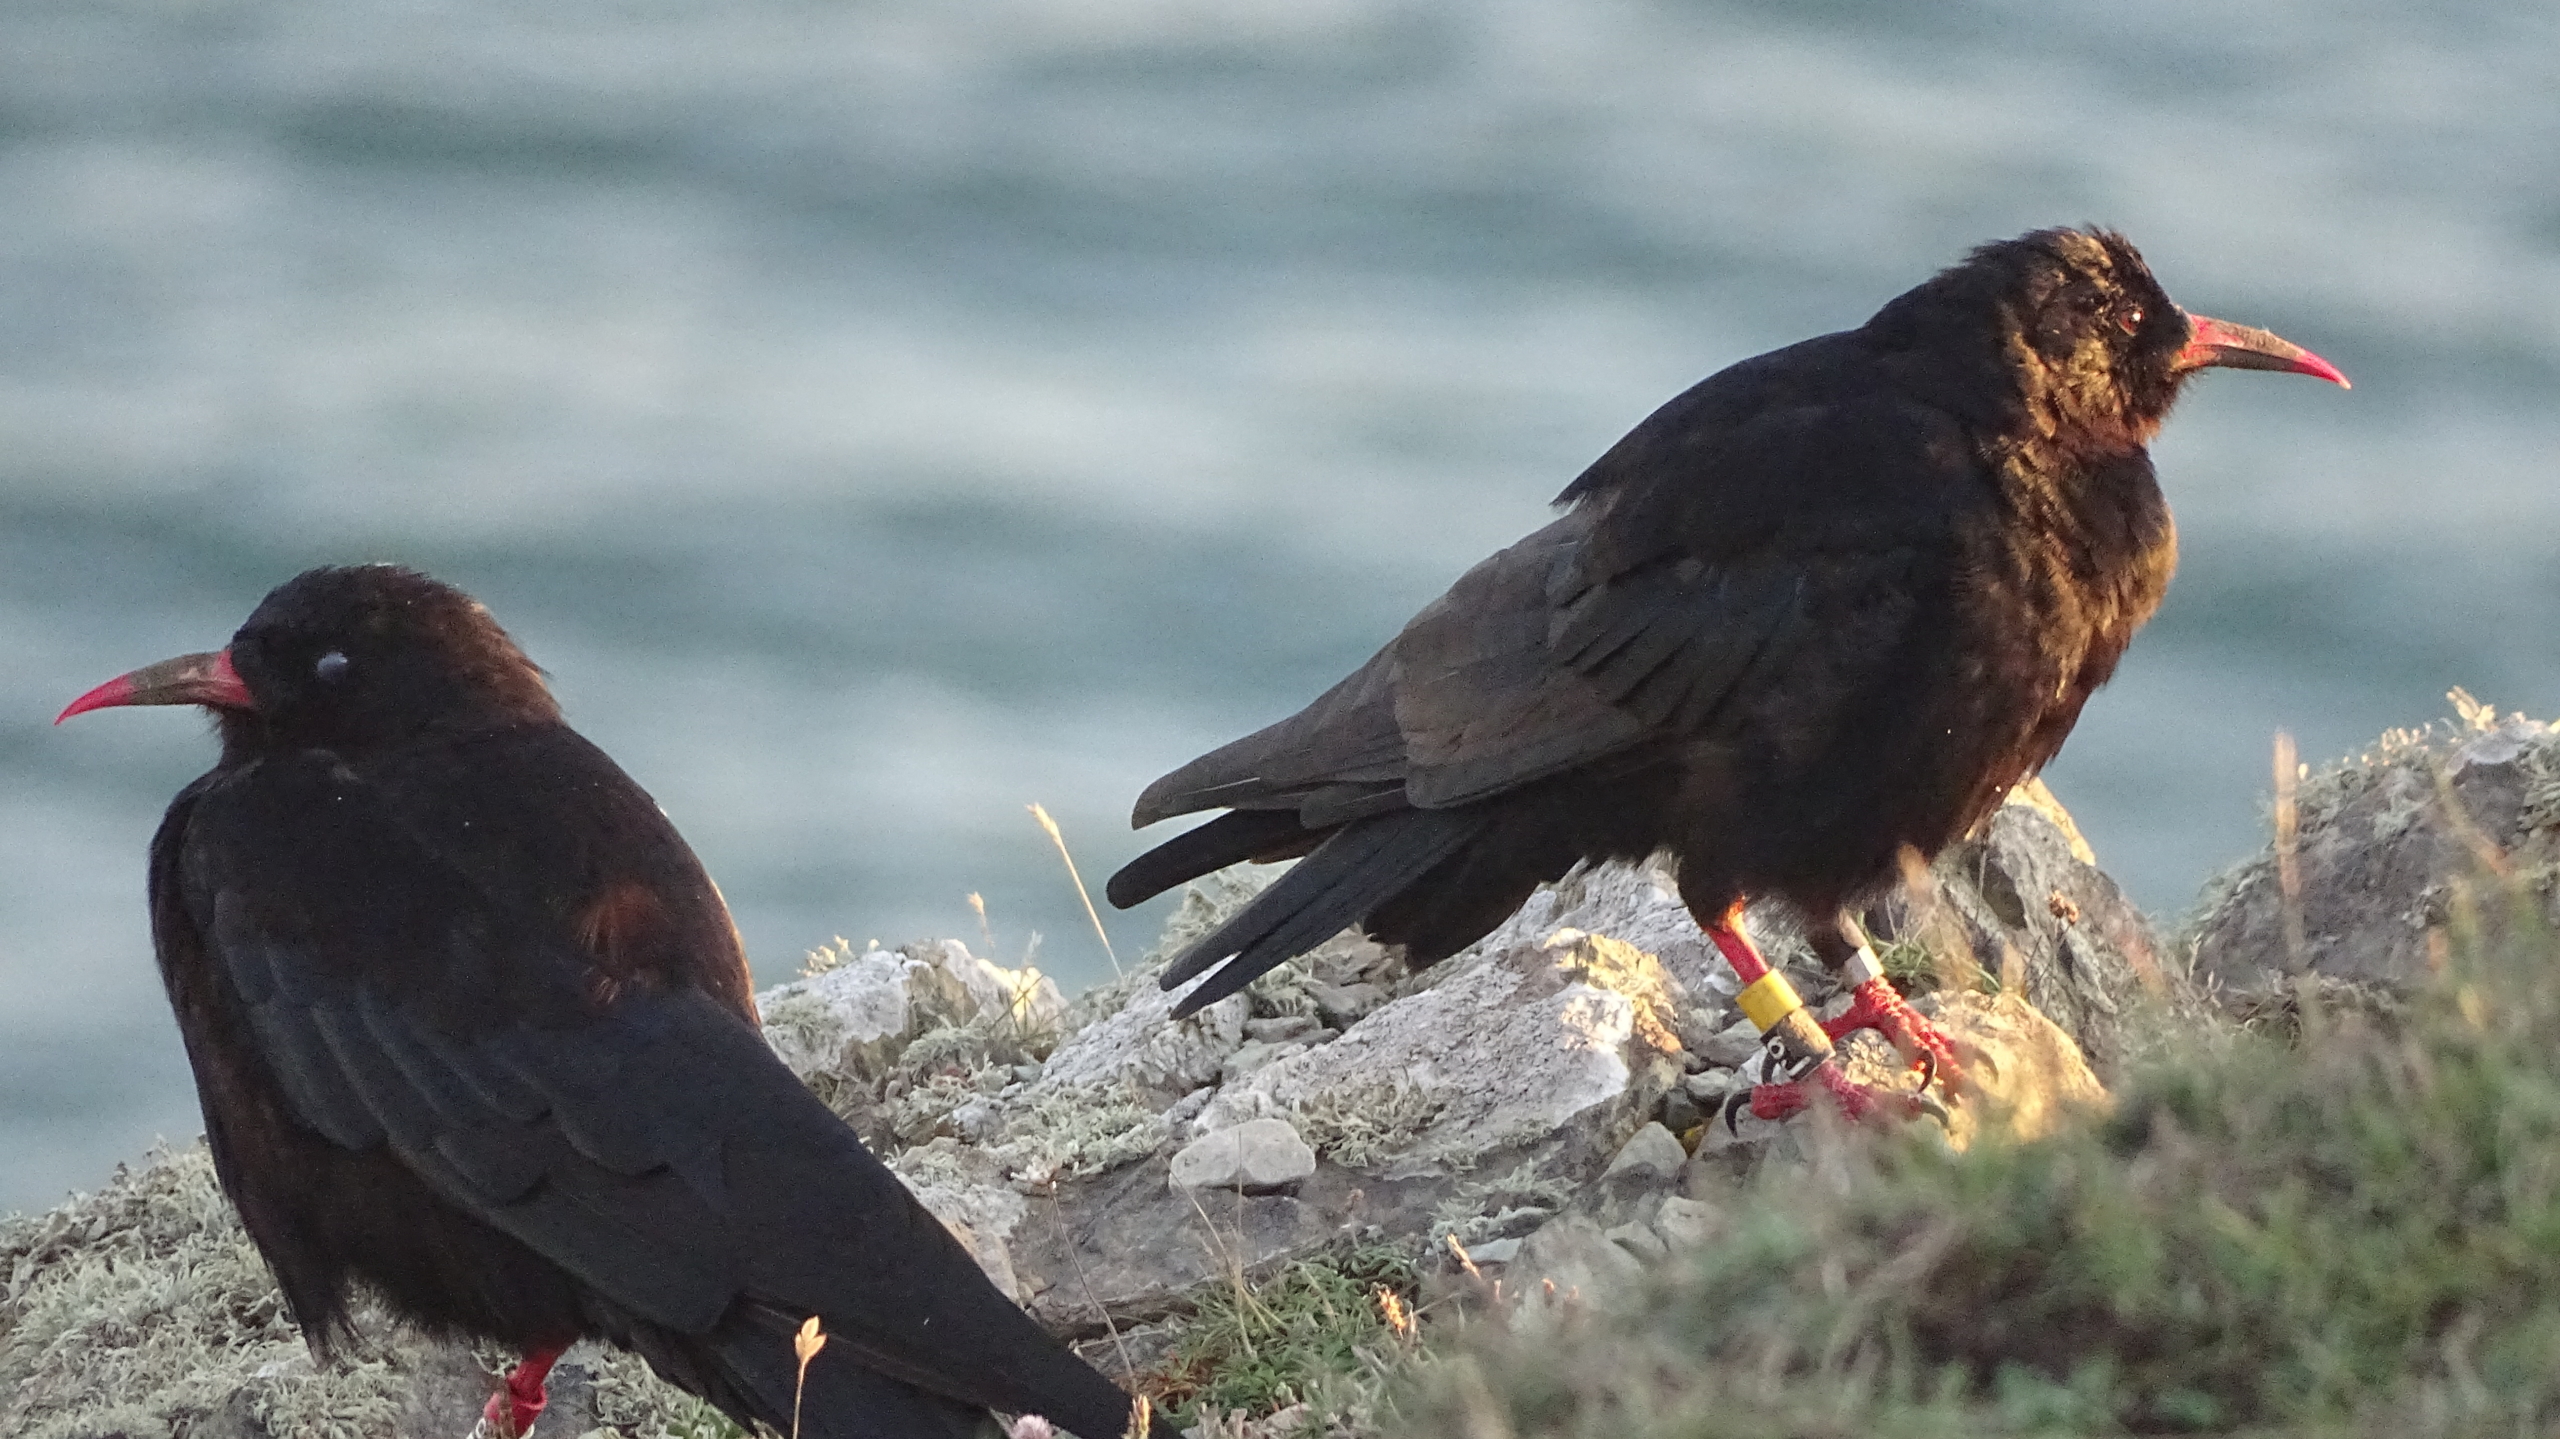 A couple of choughs we saw near the South Stack Lighthouse on Anglesey